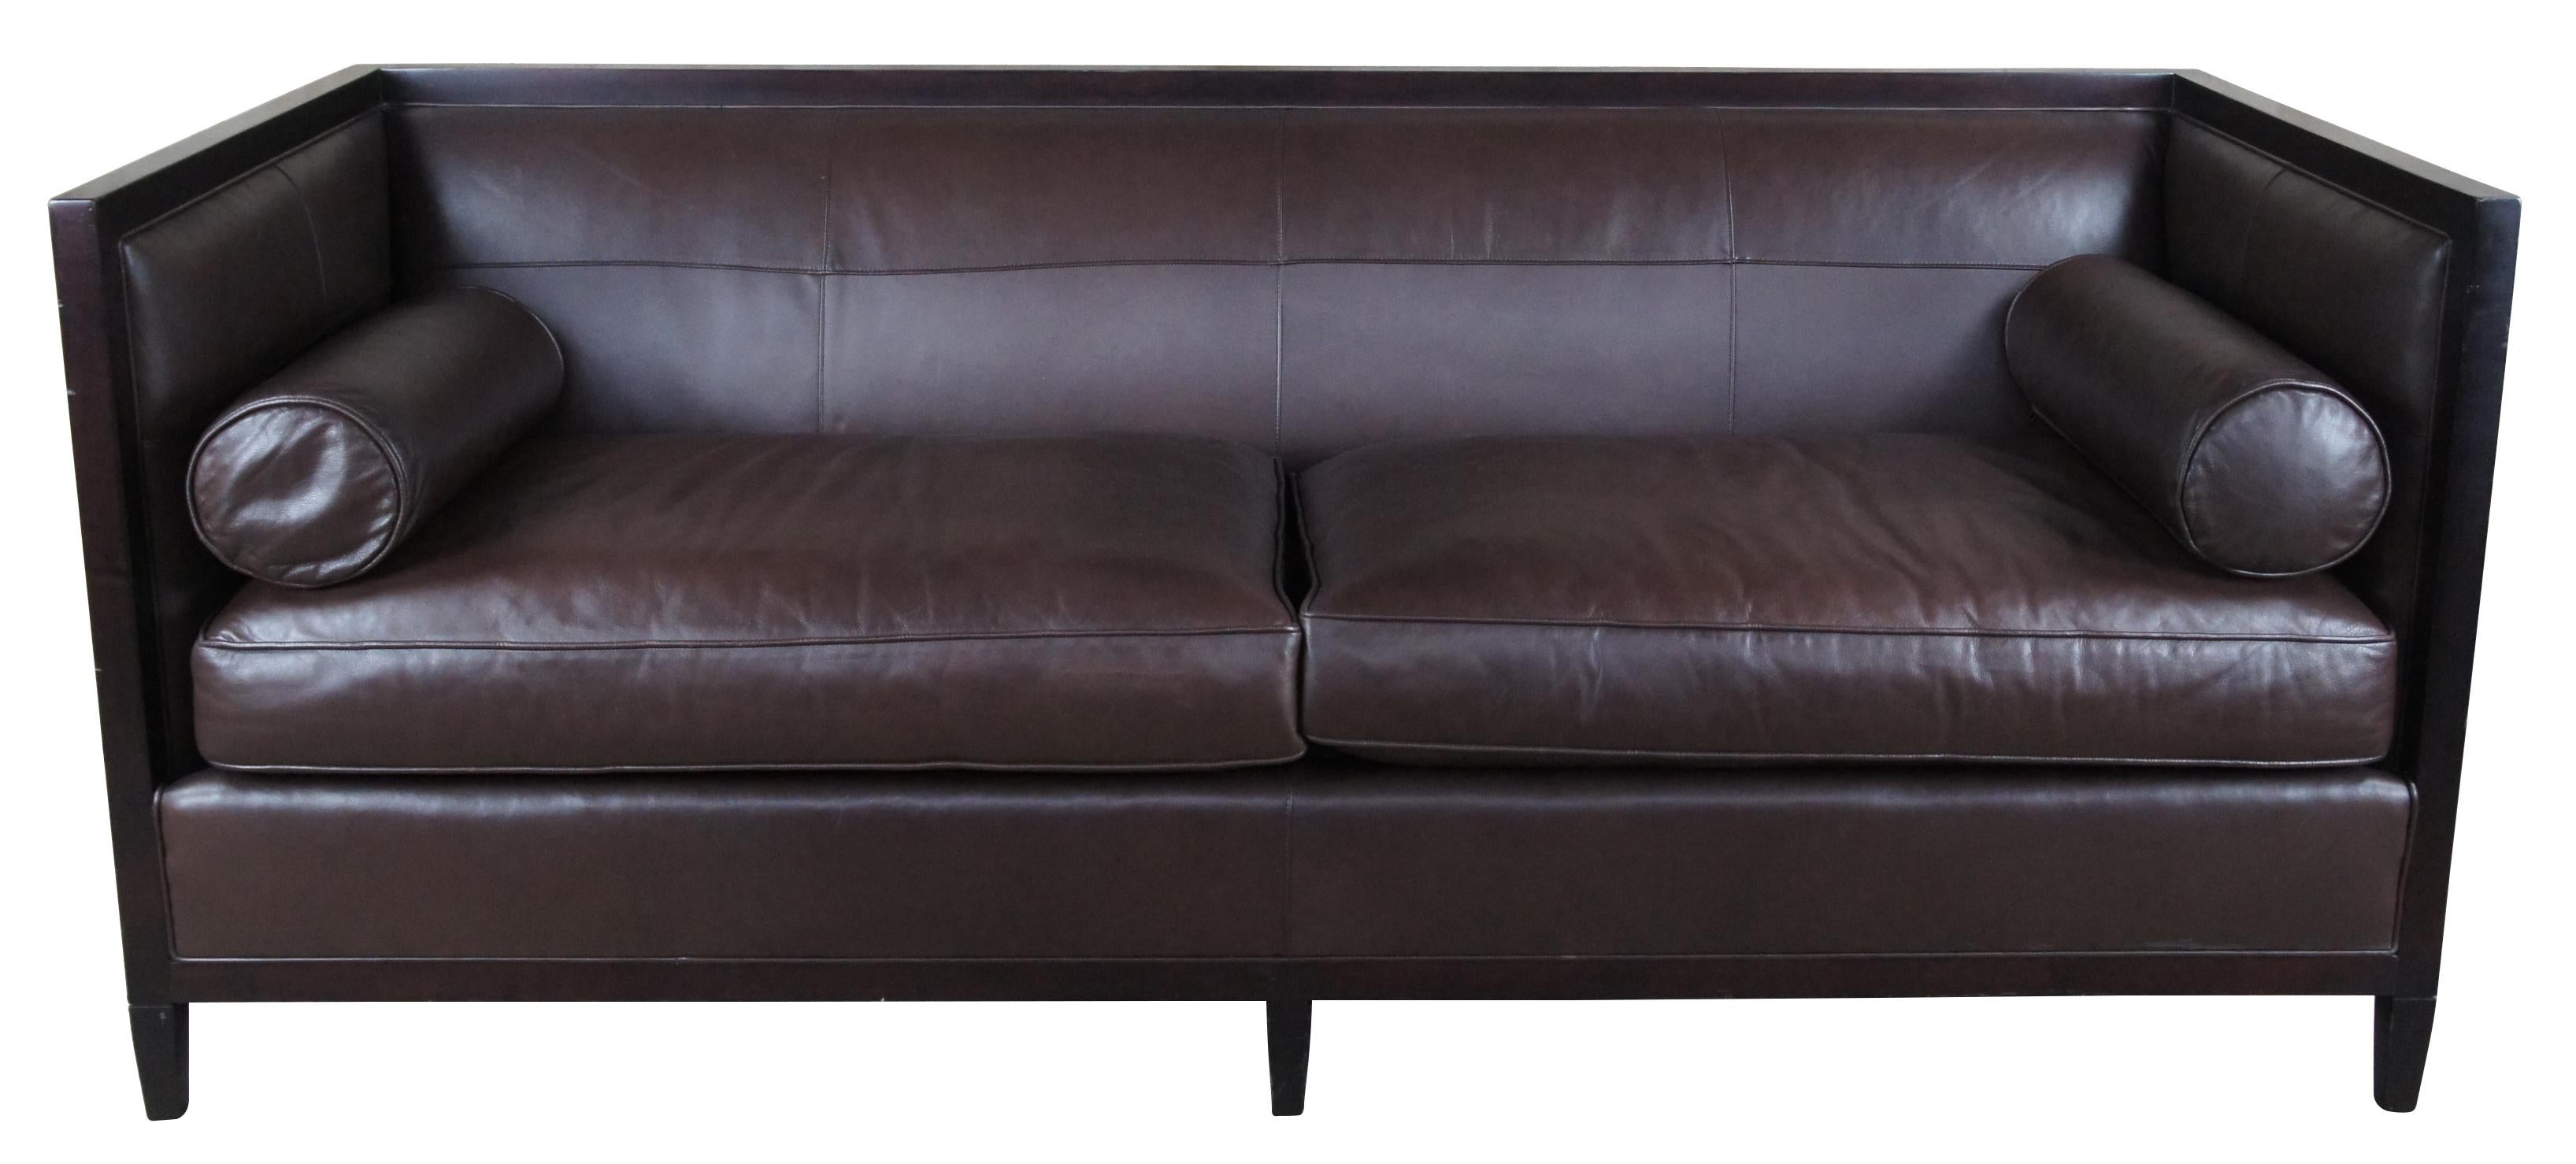 Baker Furniture Archetype Maple Wood Banded Brown Leather Modern Sofa 6370-78 8